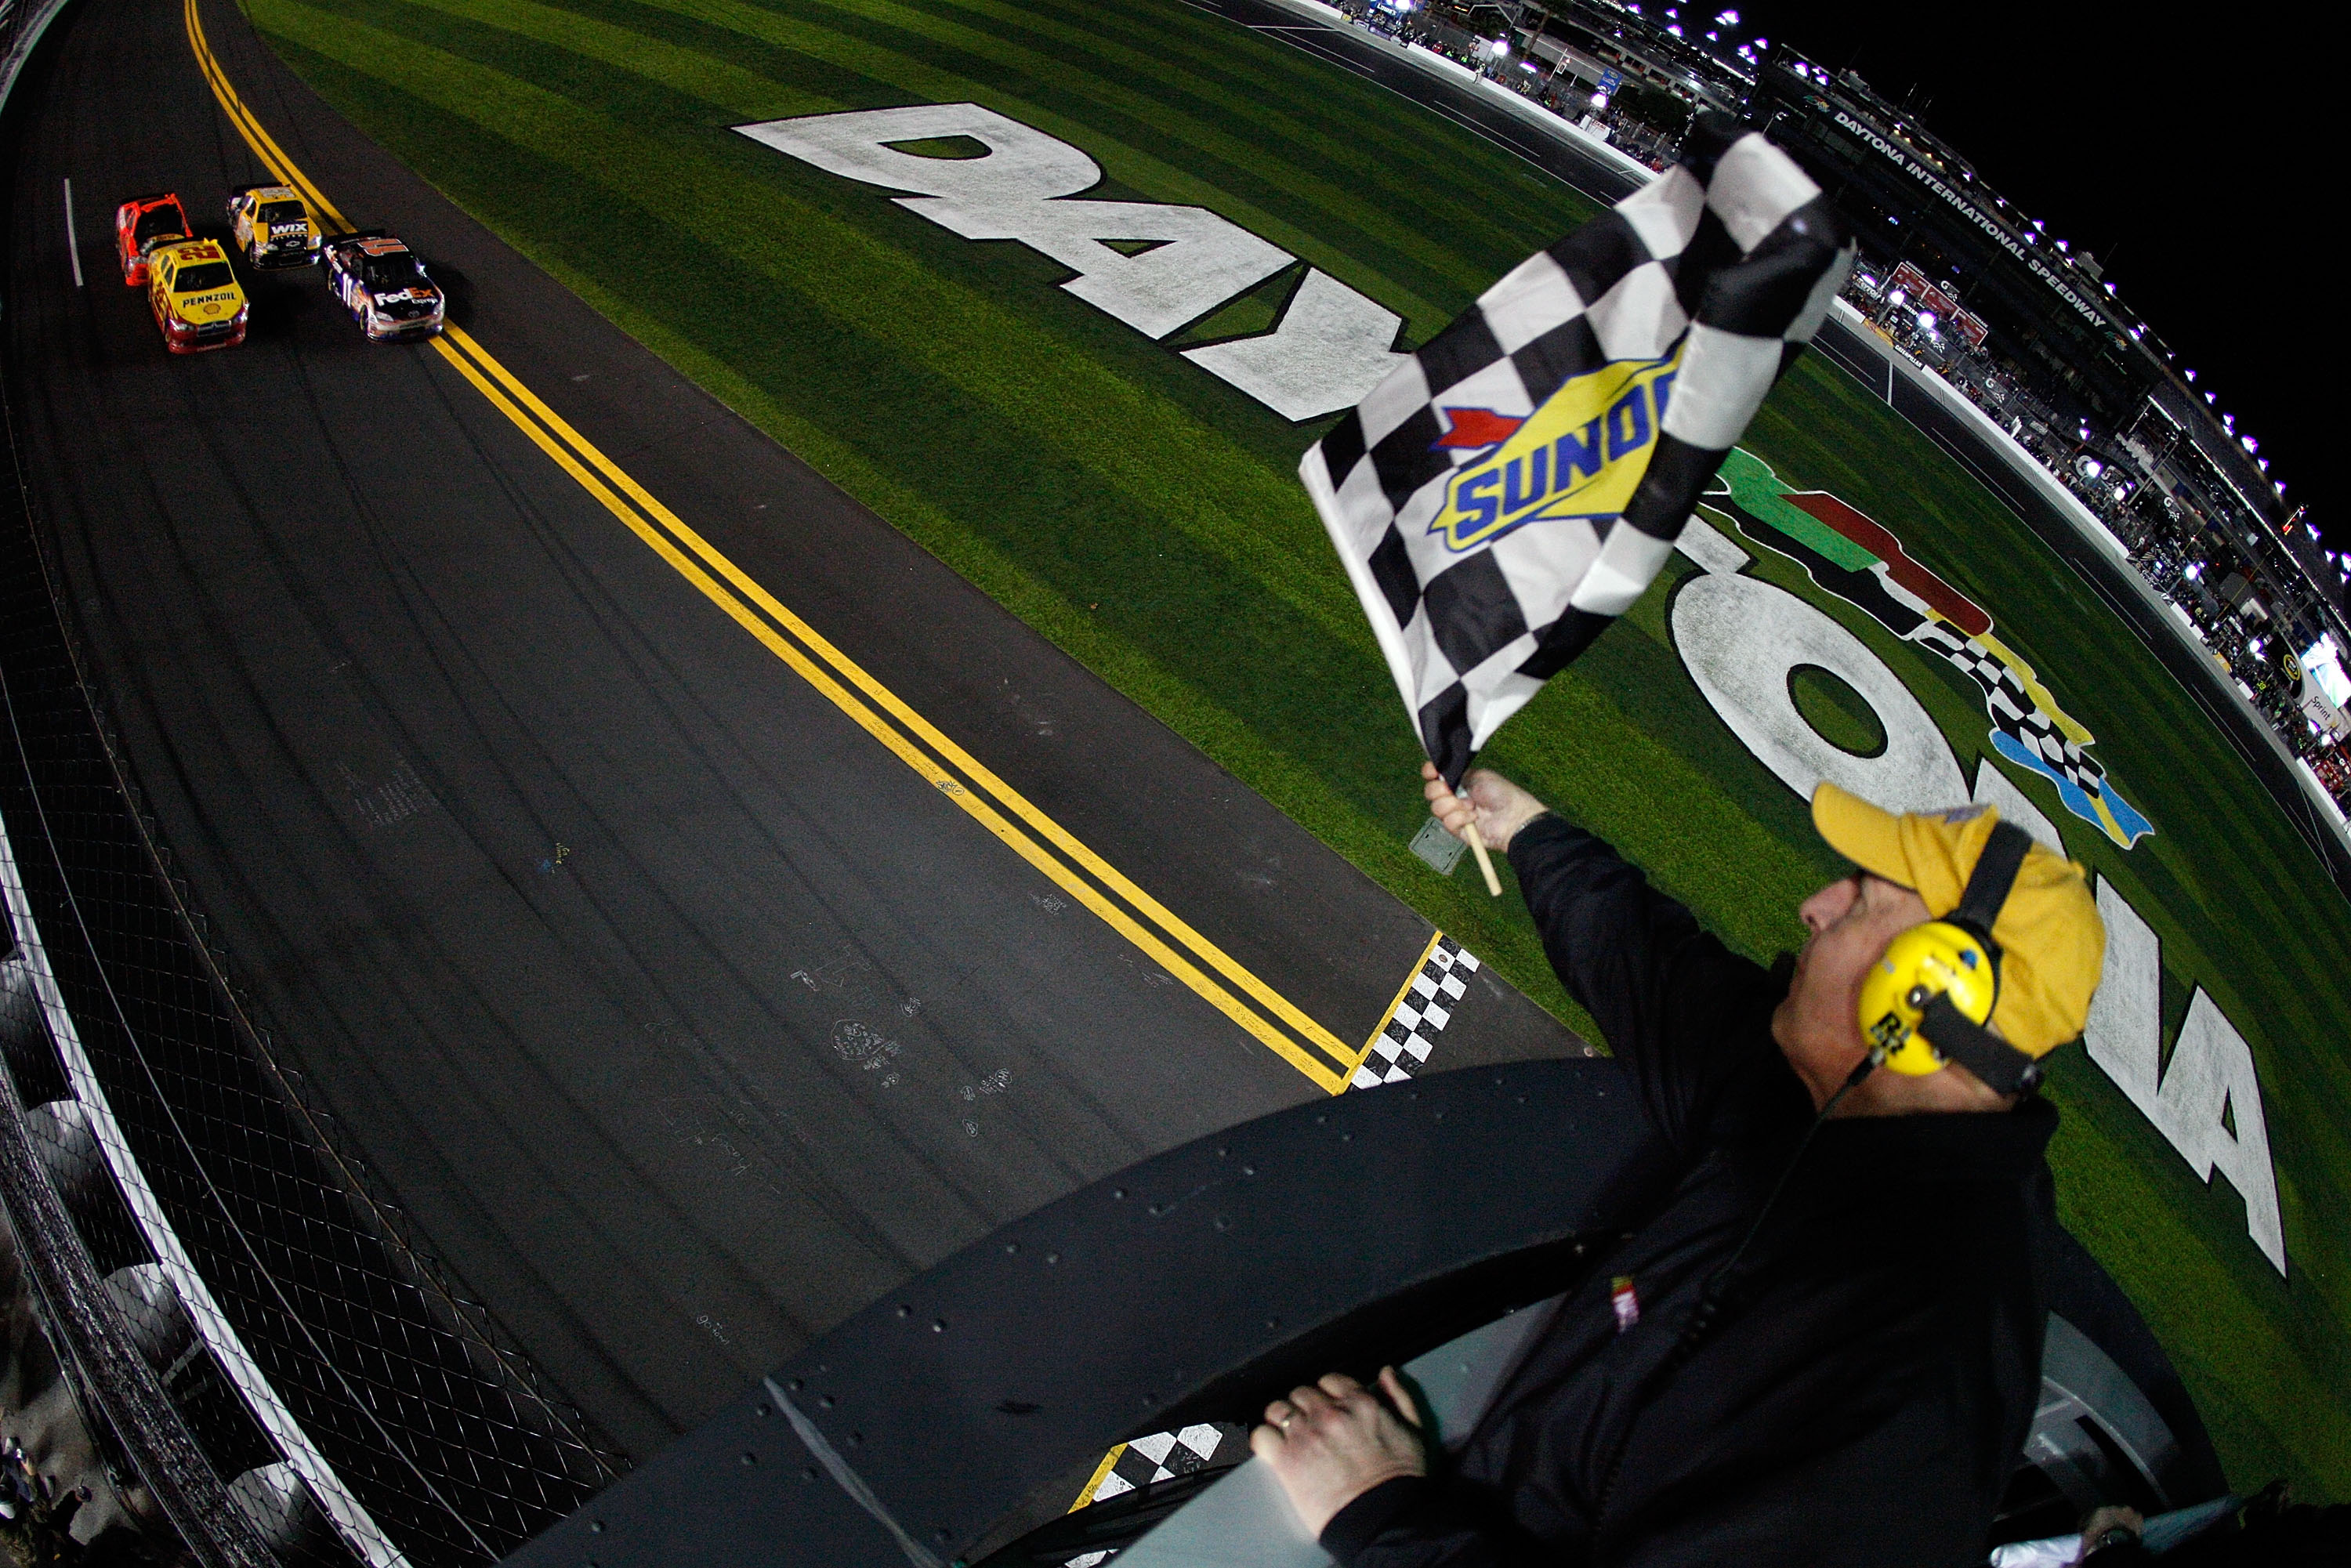 Kurt Busch may have come across the finish line in second but NASCAR made statement awarding him the win.